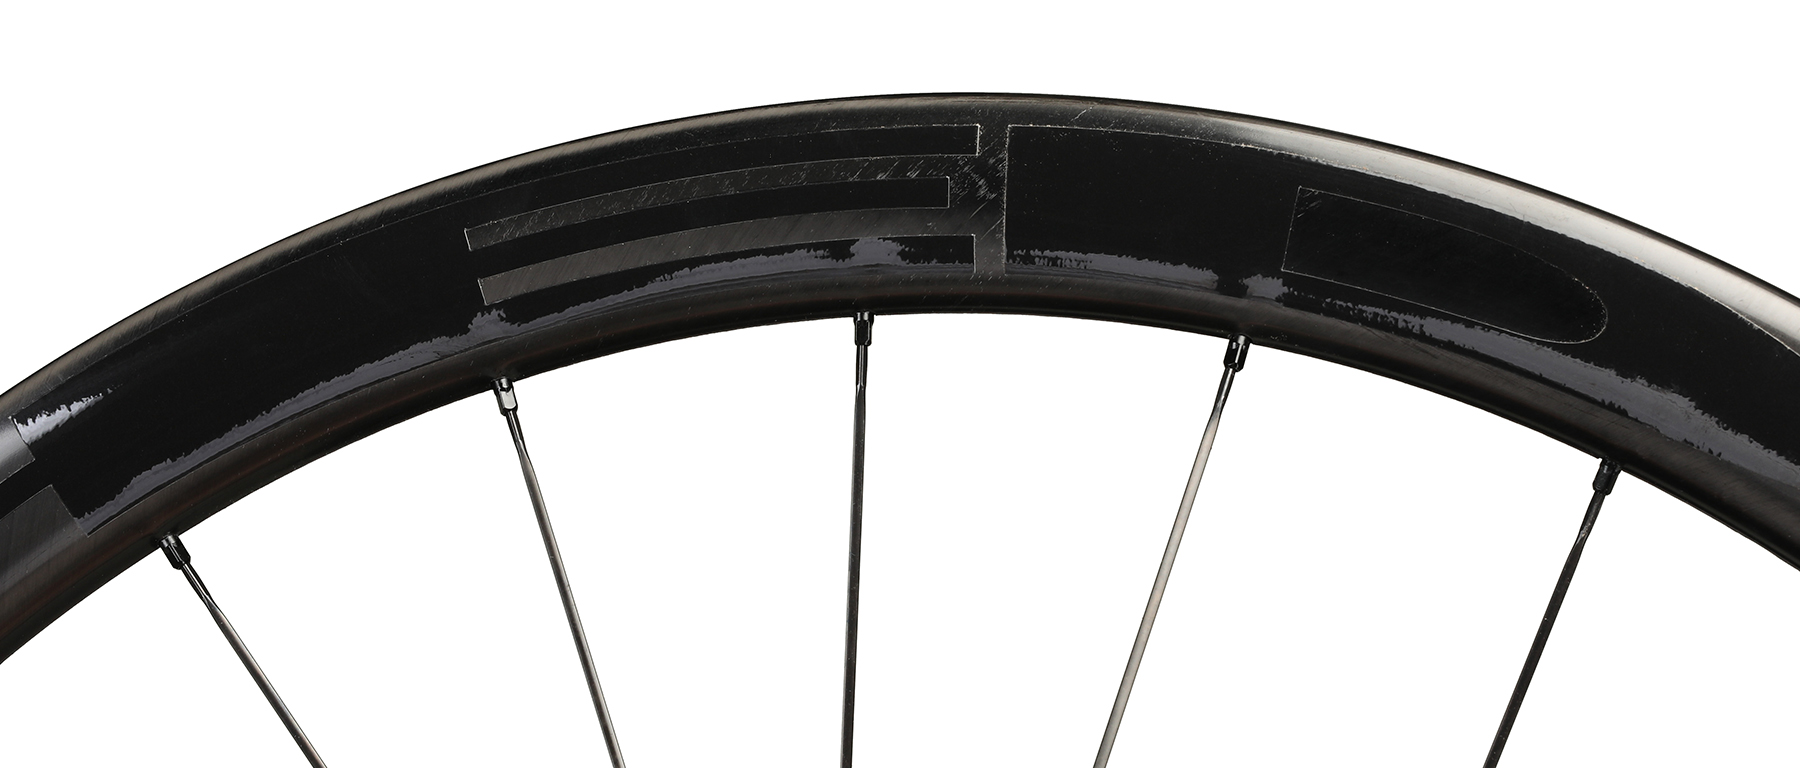 HED Vanquish RC4 Pro Front Wheel